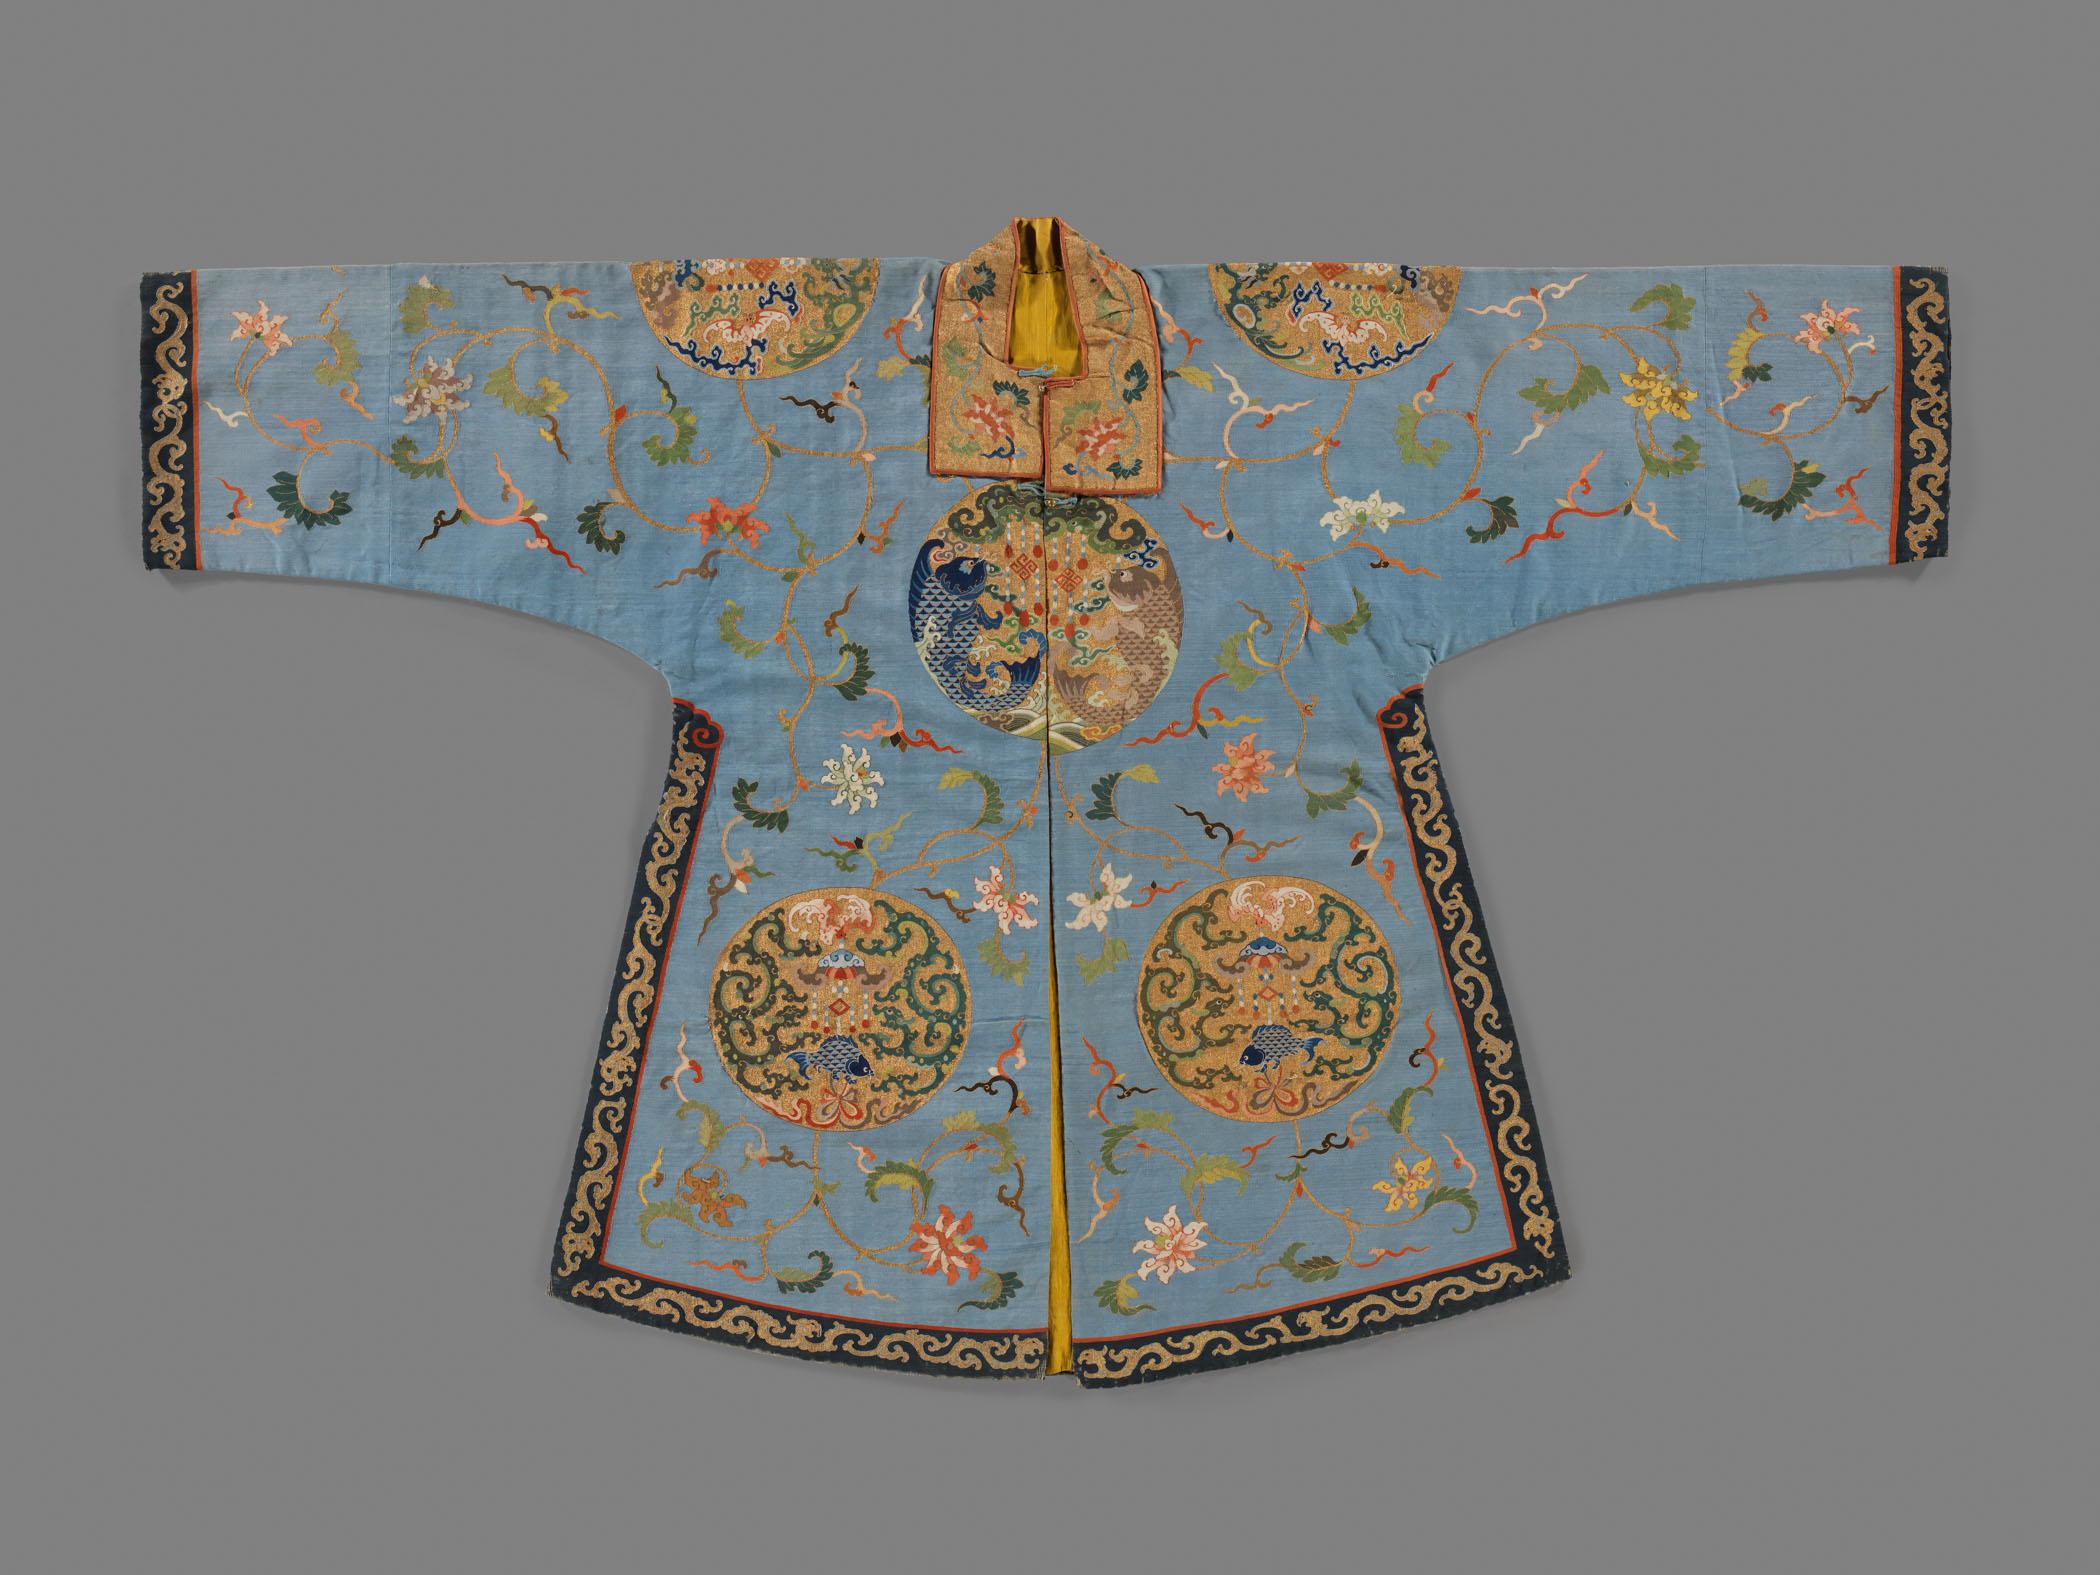 A light blue coat that is filled with Chinese style flowers and décor.